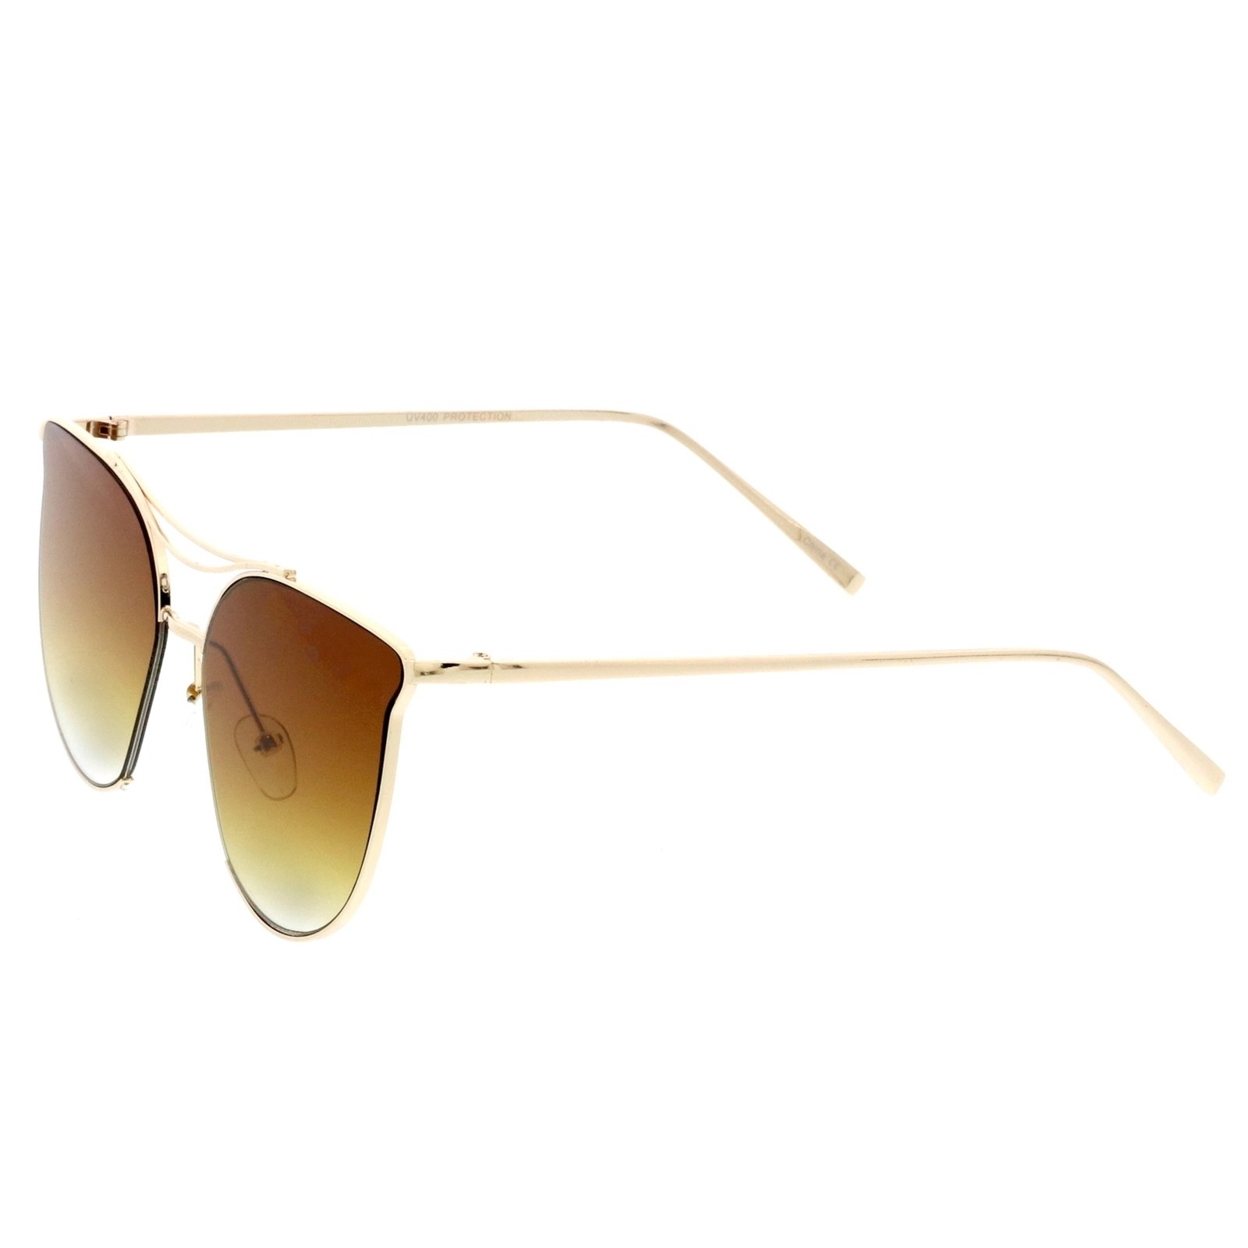 Modern Metal Cat Eye Sunglasses With Slim Arms Double Nose Bridge Round Flat Lens 55mm - Gold / Green Beige Gradient